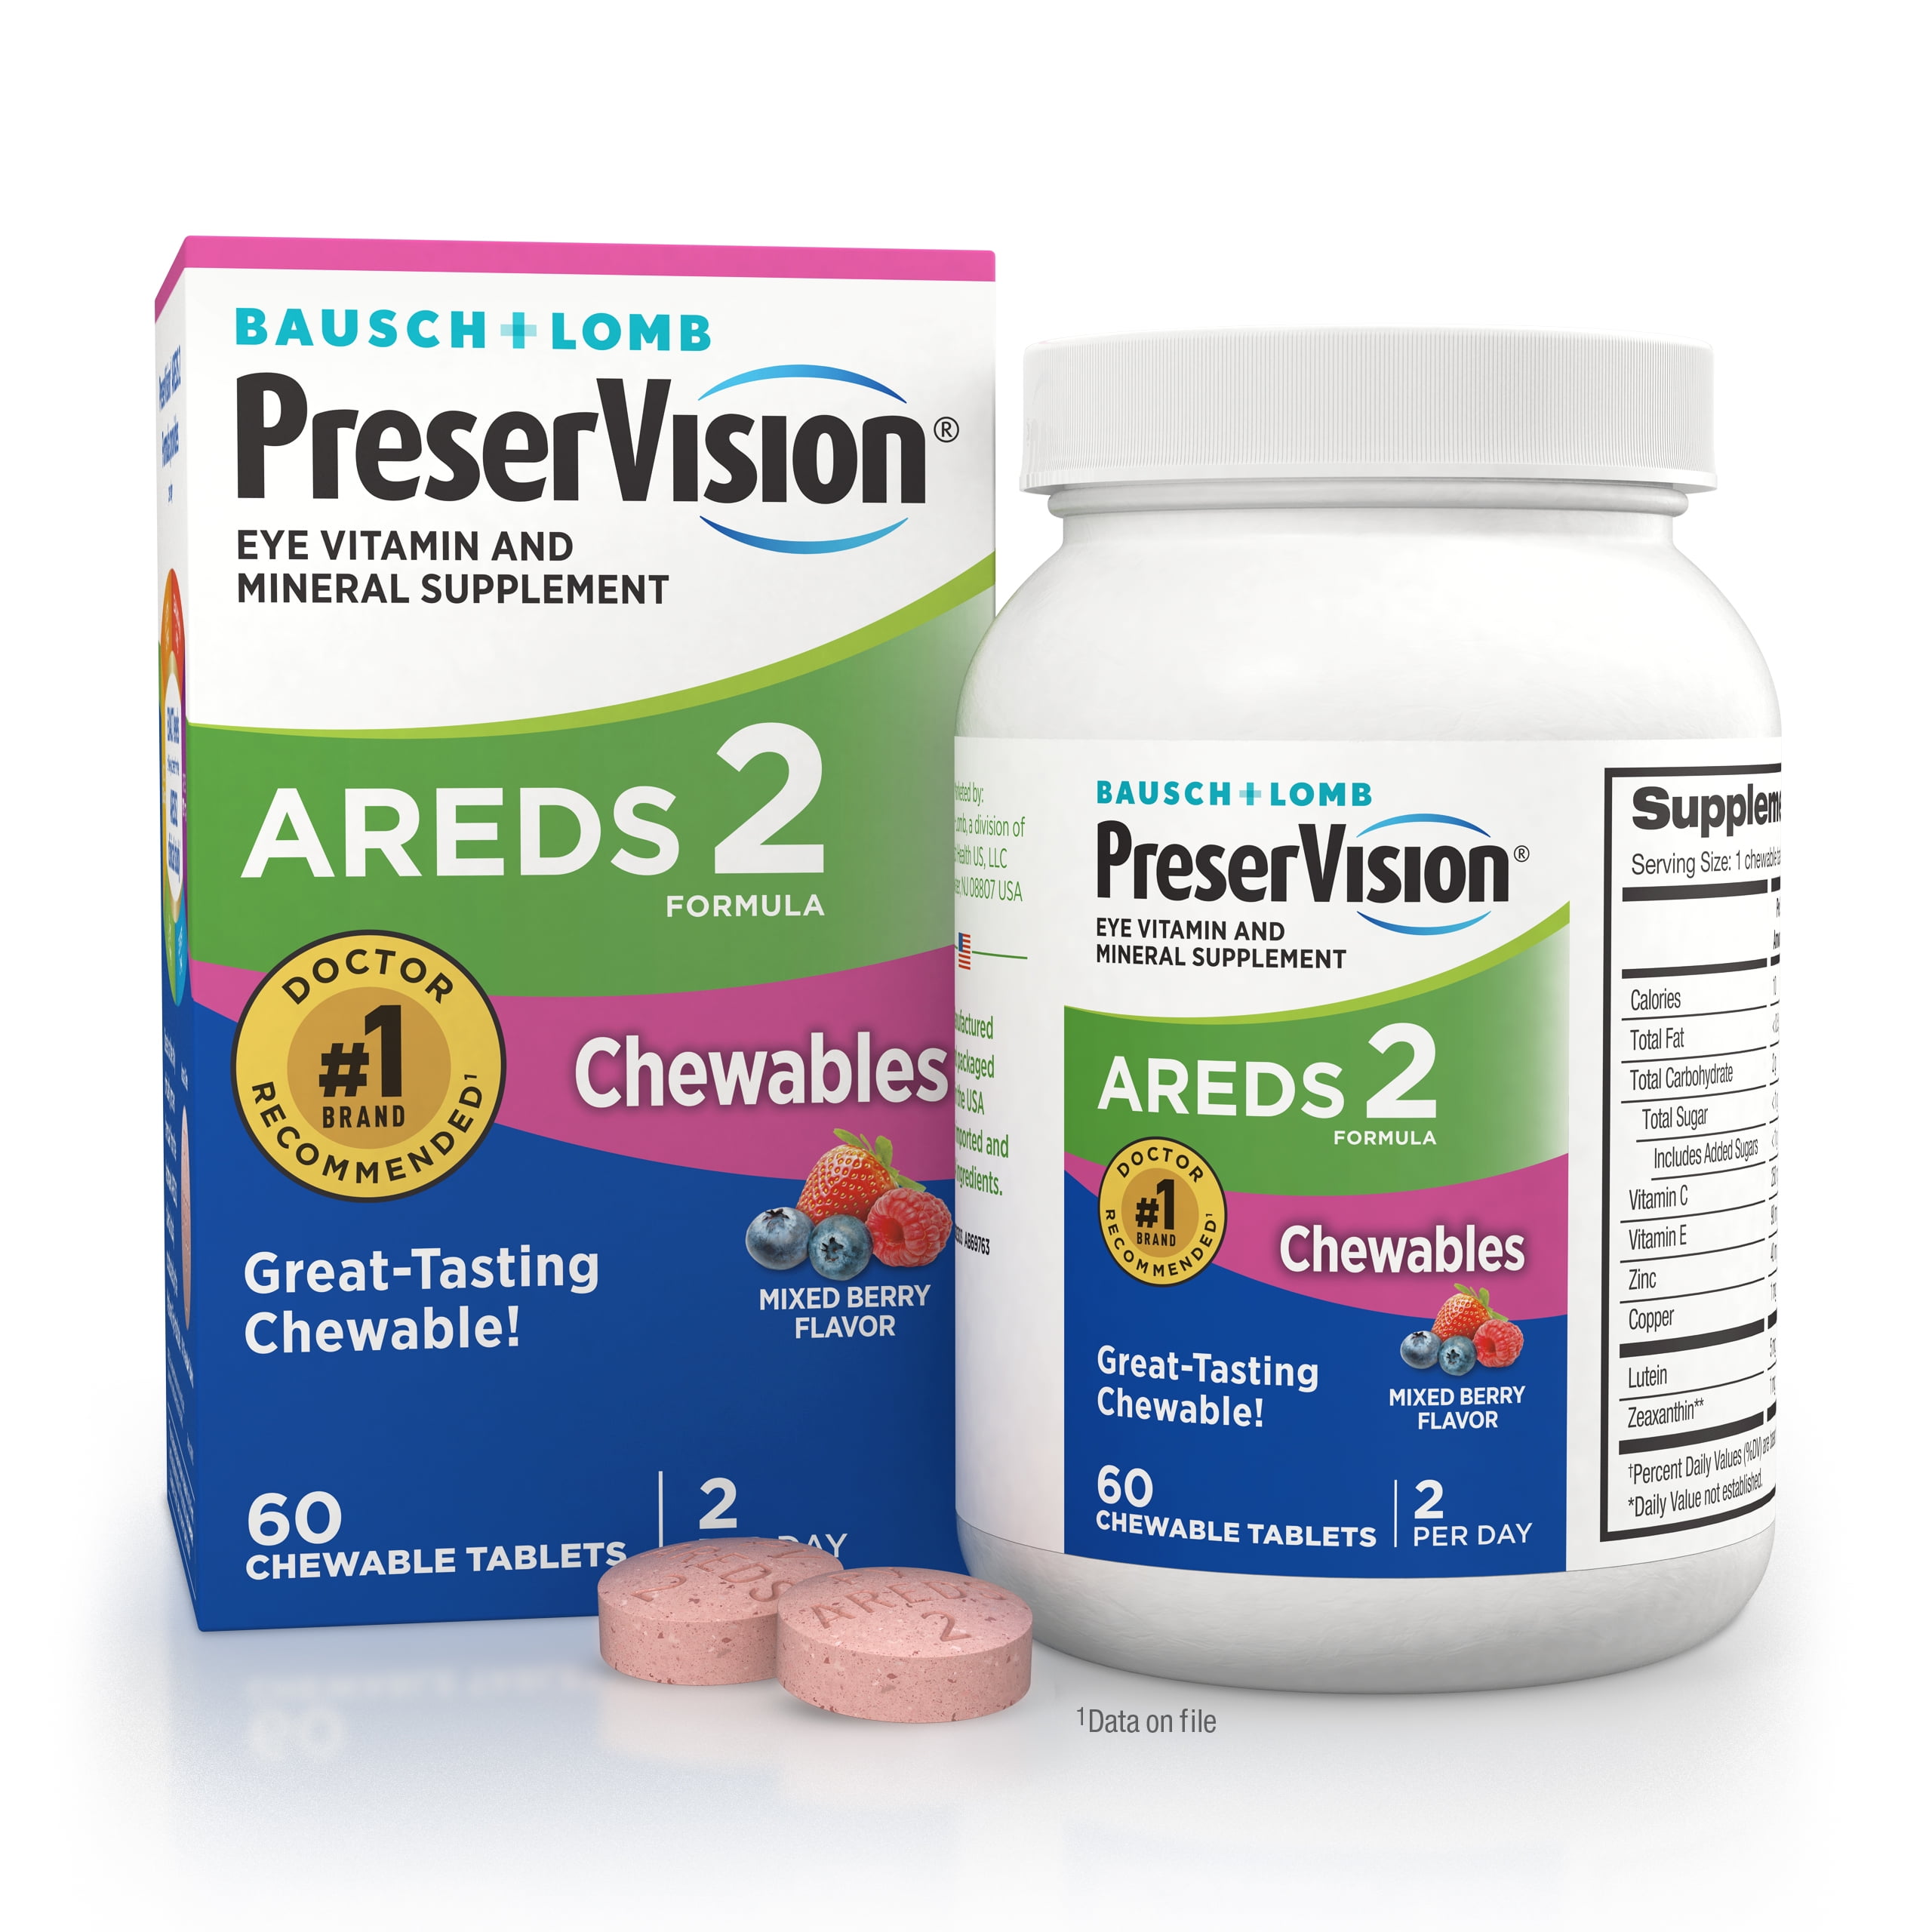 PreserVision AREDS 2 Formula Eye Vitamin and Mineral Supplement with Lutein & Zeaxanthin, Mixed Berry Flavor, 60 Chewable Tablets